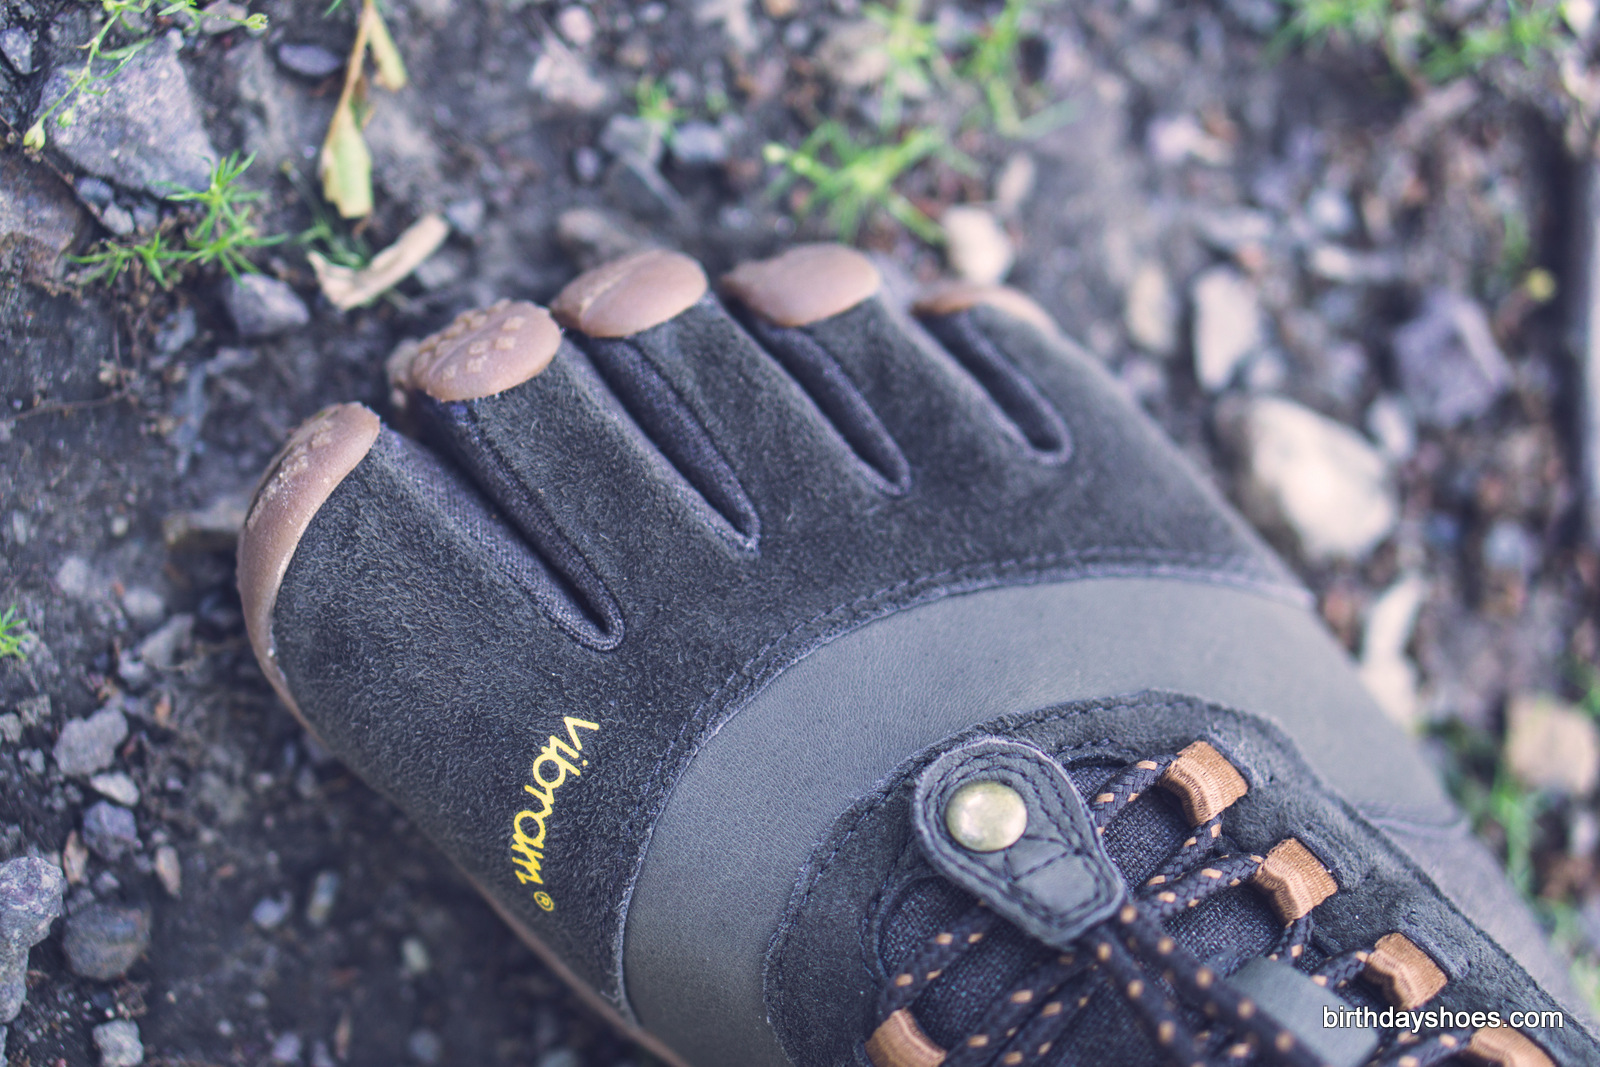 more toe protection, and a more rugged strap/keeper system